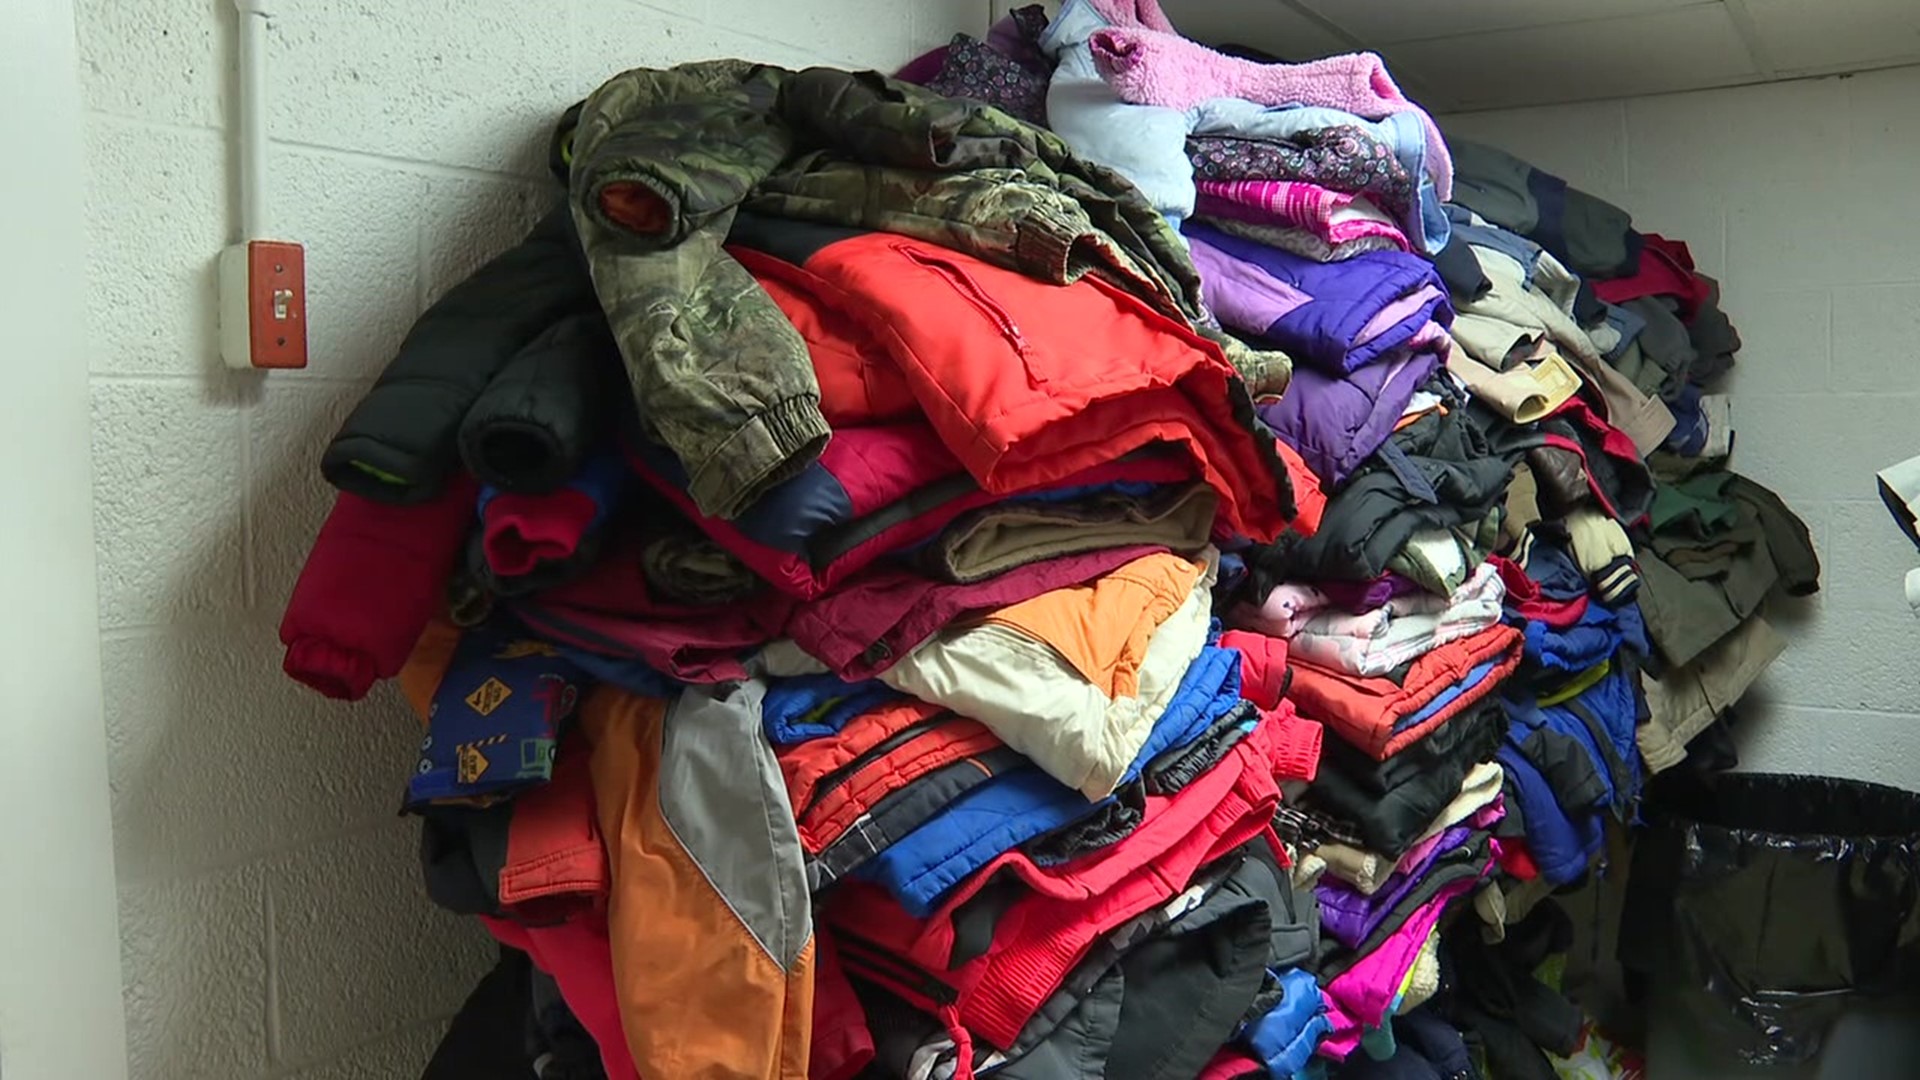 Organizers with a group in Susquehanna County are preparing for a coat distribution and are in need of winter items to give to those in need.